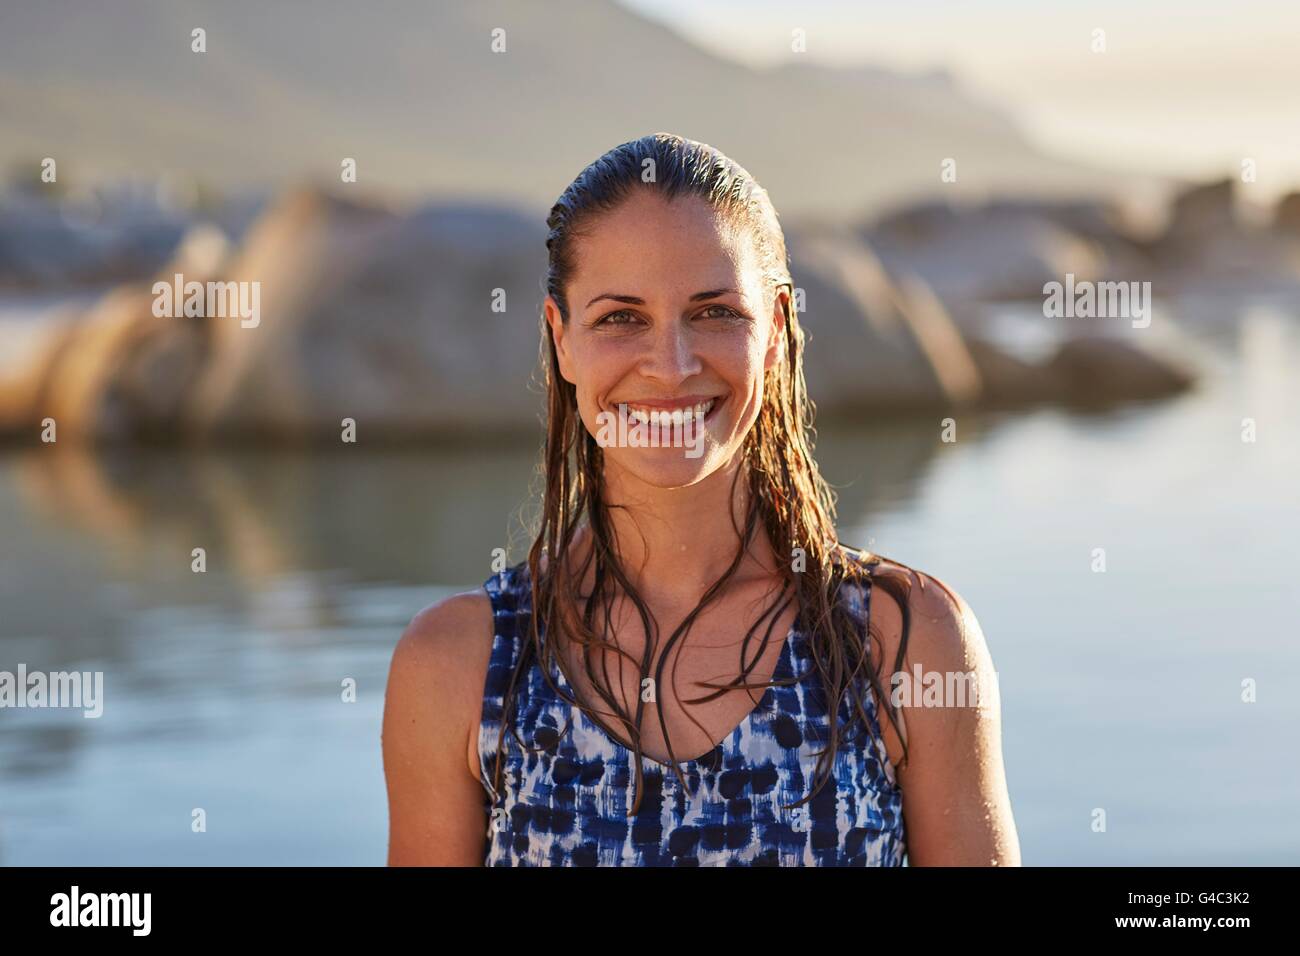 MODEL RELEASED. Young woman with wet hair smiling towards camera, portrait. Stock Photo